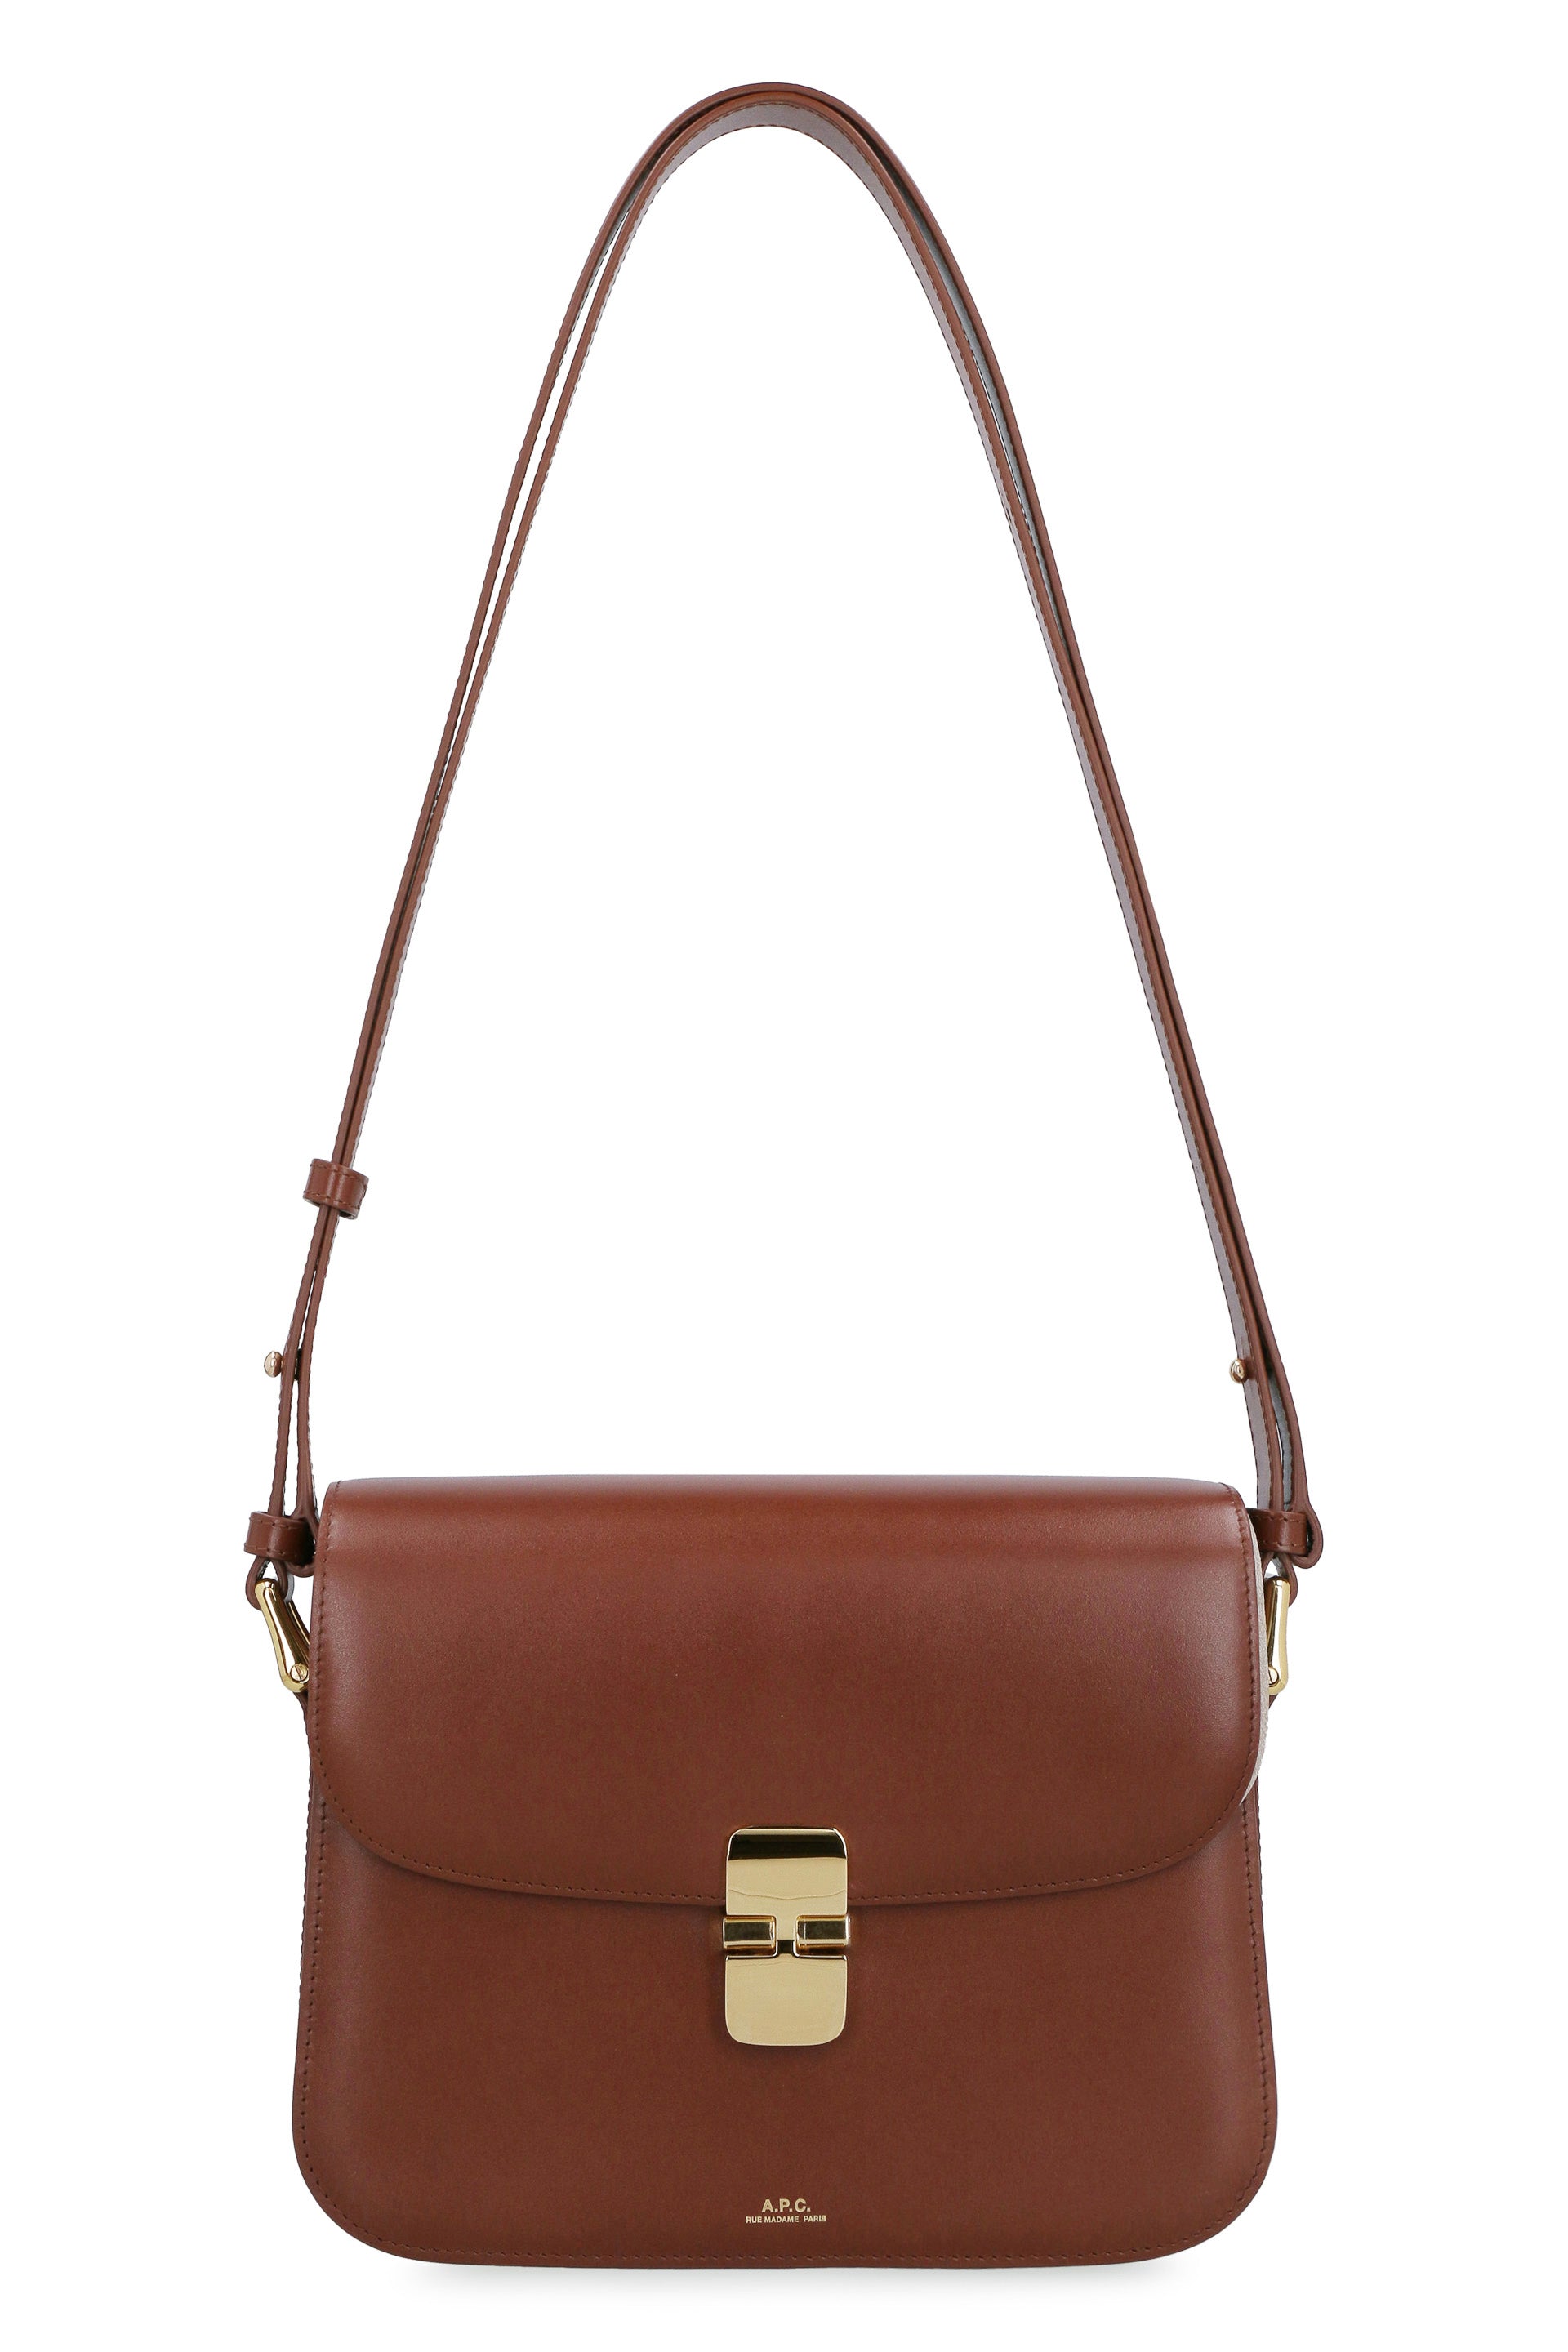 A.P.C. Grace Beige and Brown Leather Crossbody Bag